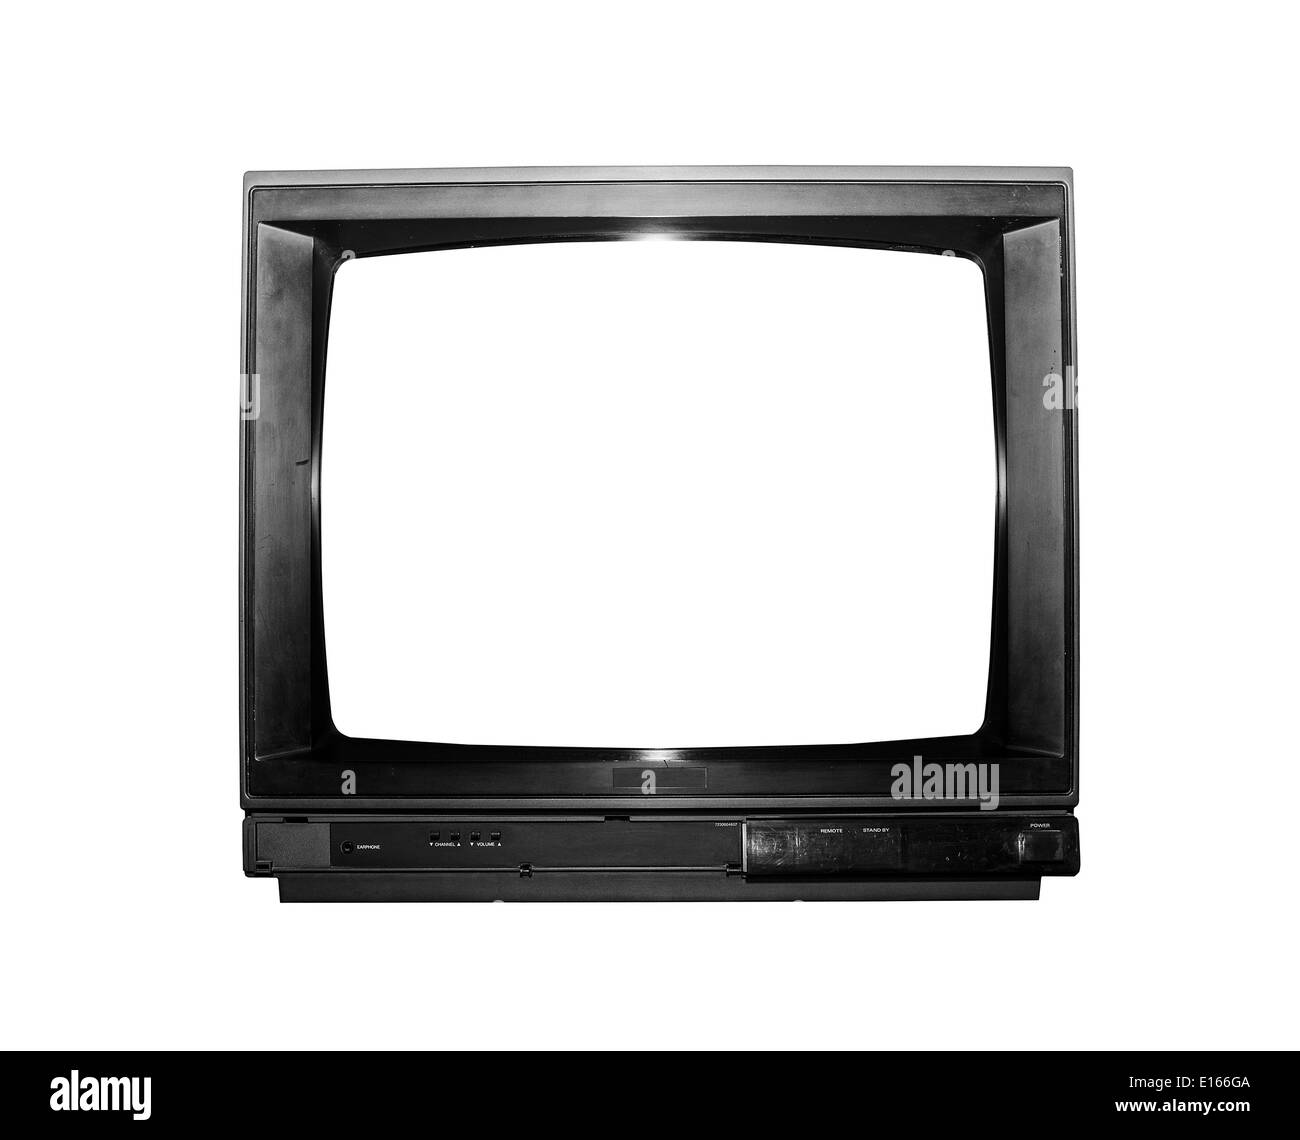 Grungy Old TV isolated on a white background Stock Photo